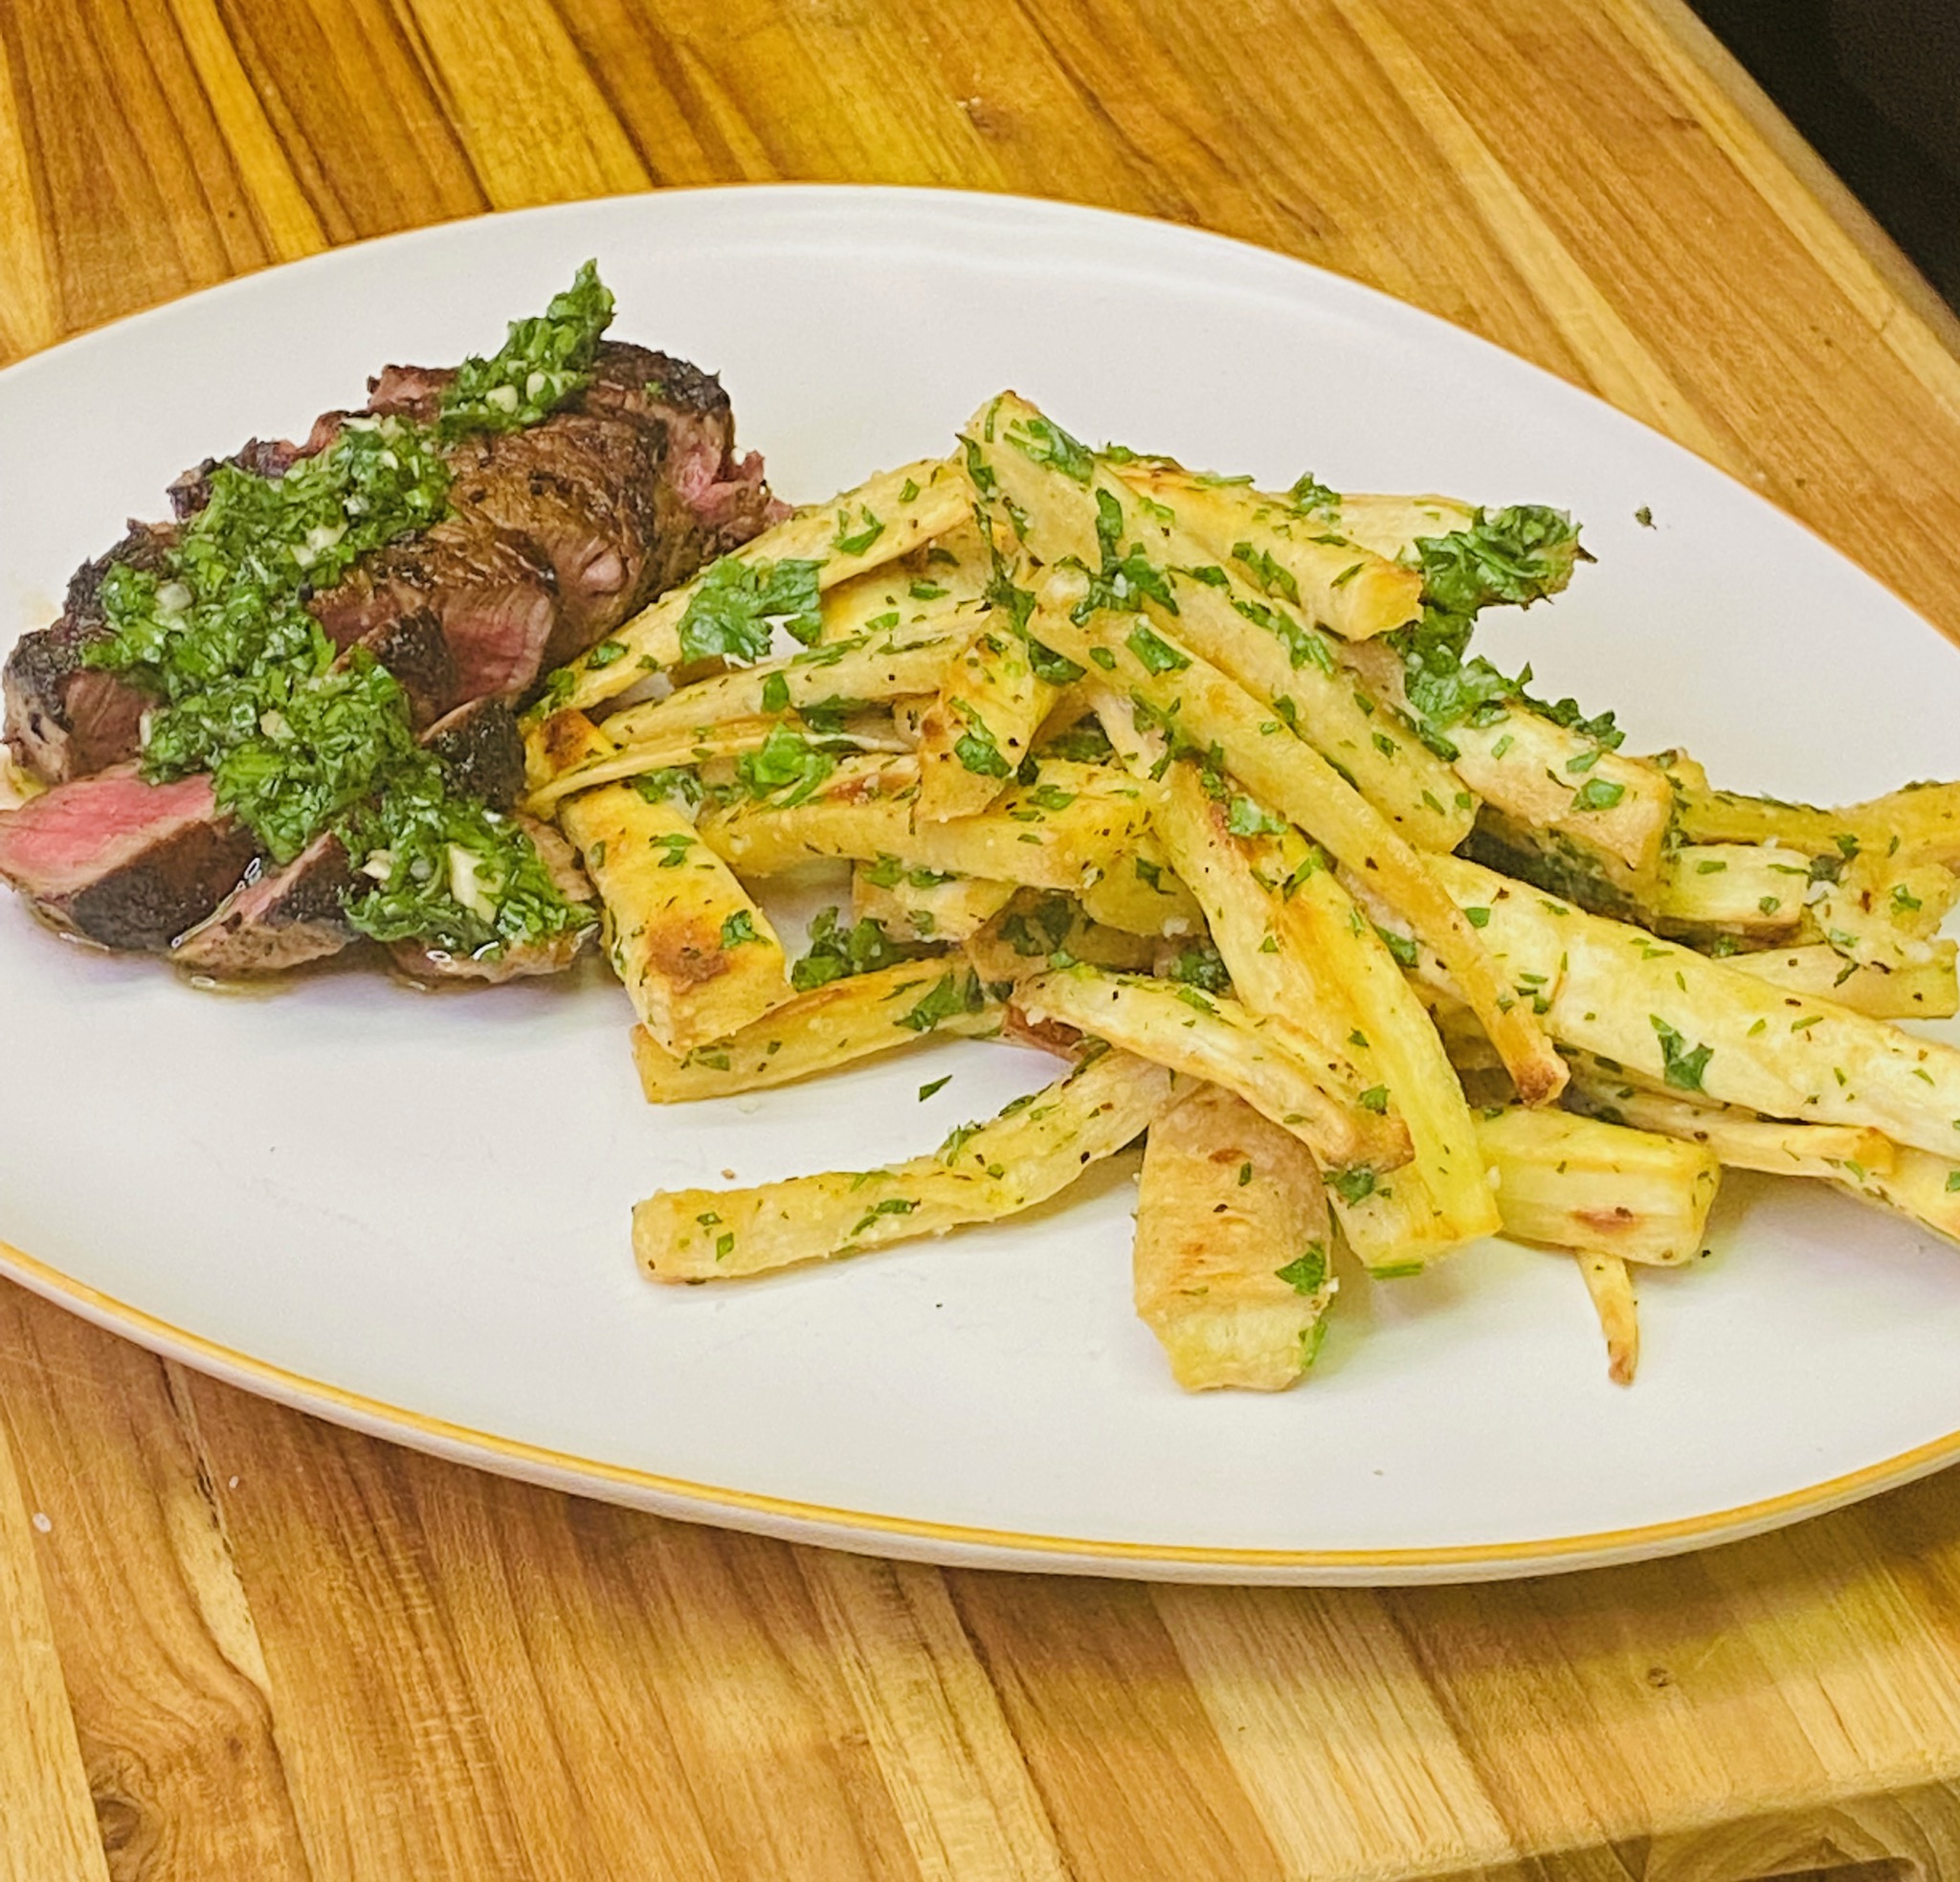 Warm Cajun Rubbed Filet with Chimichurri by Chef Kai Chase